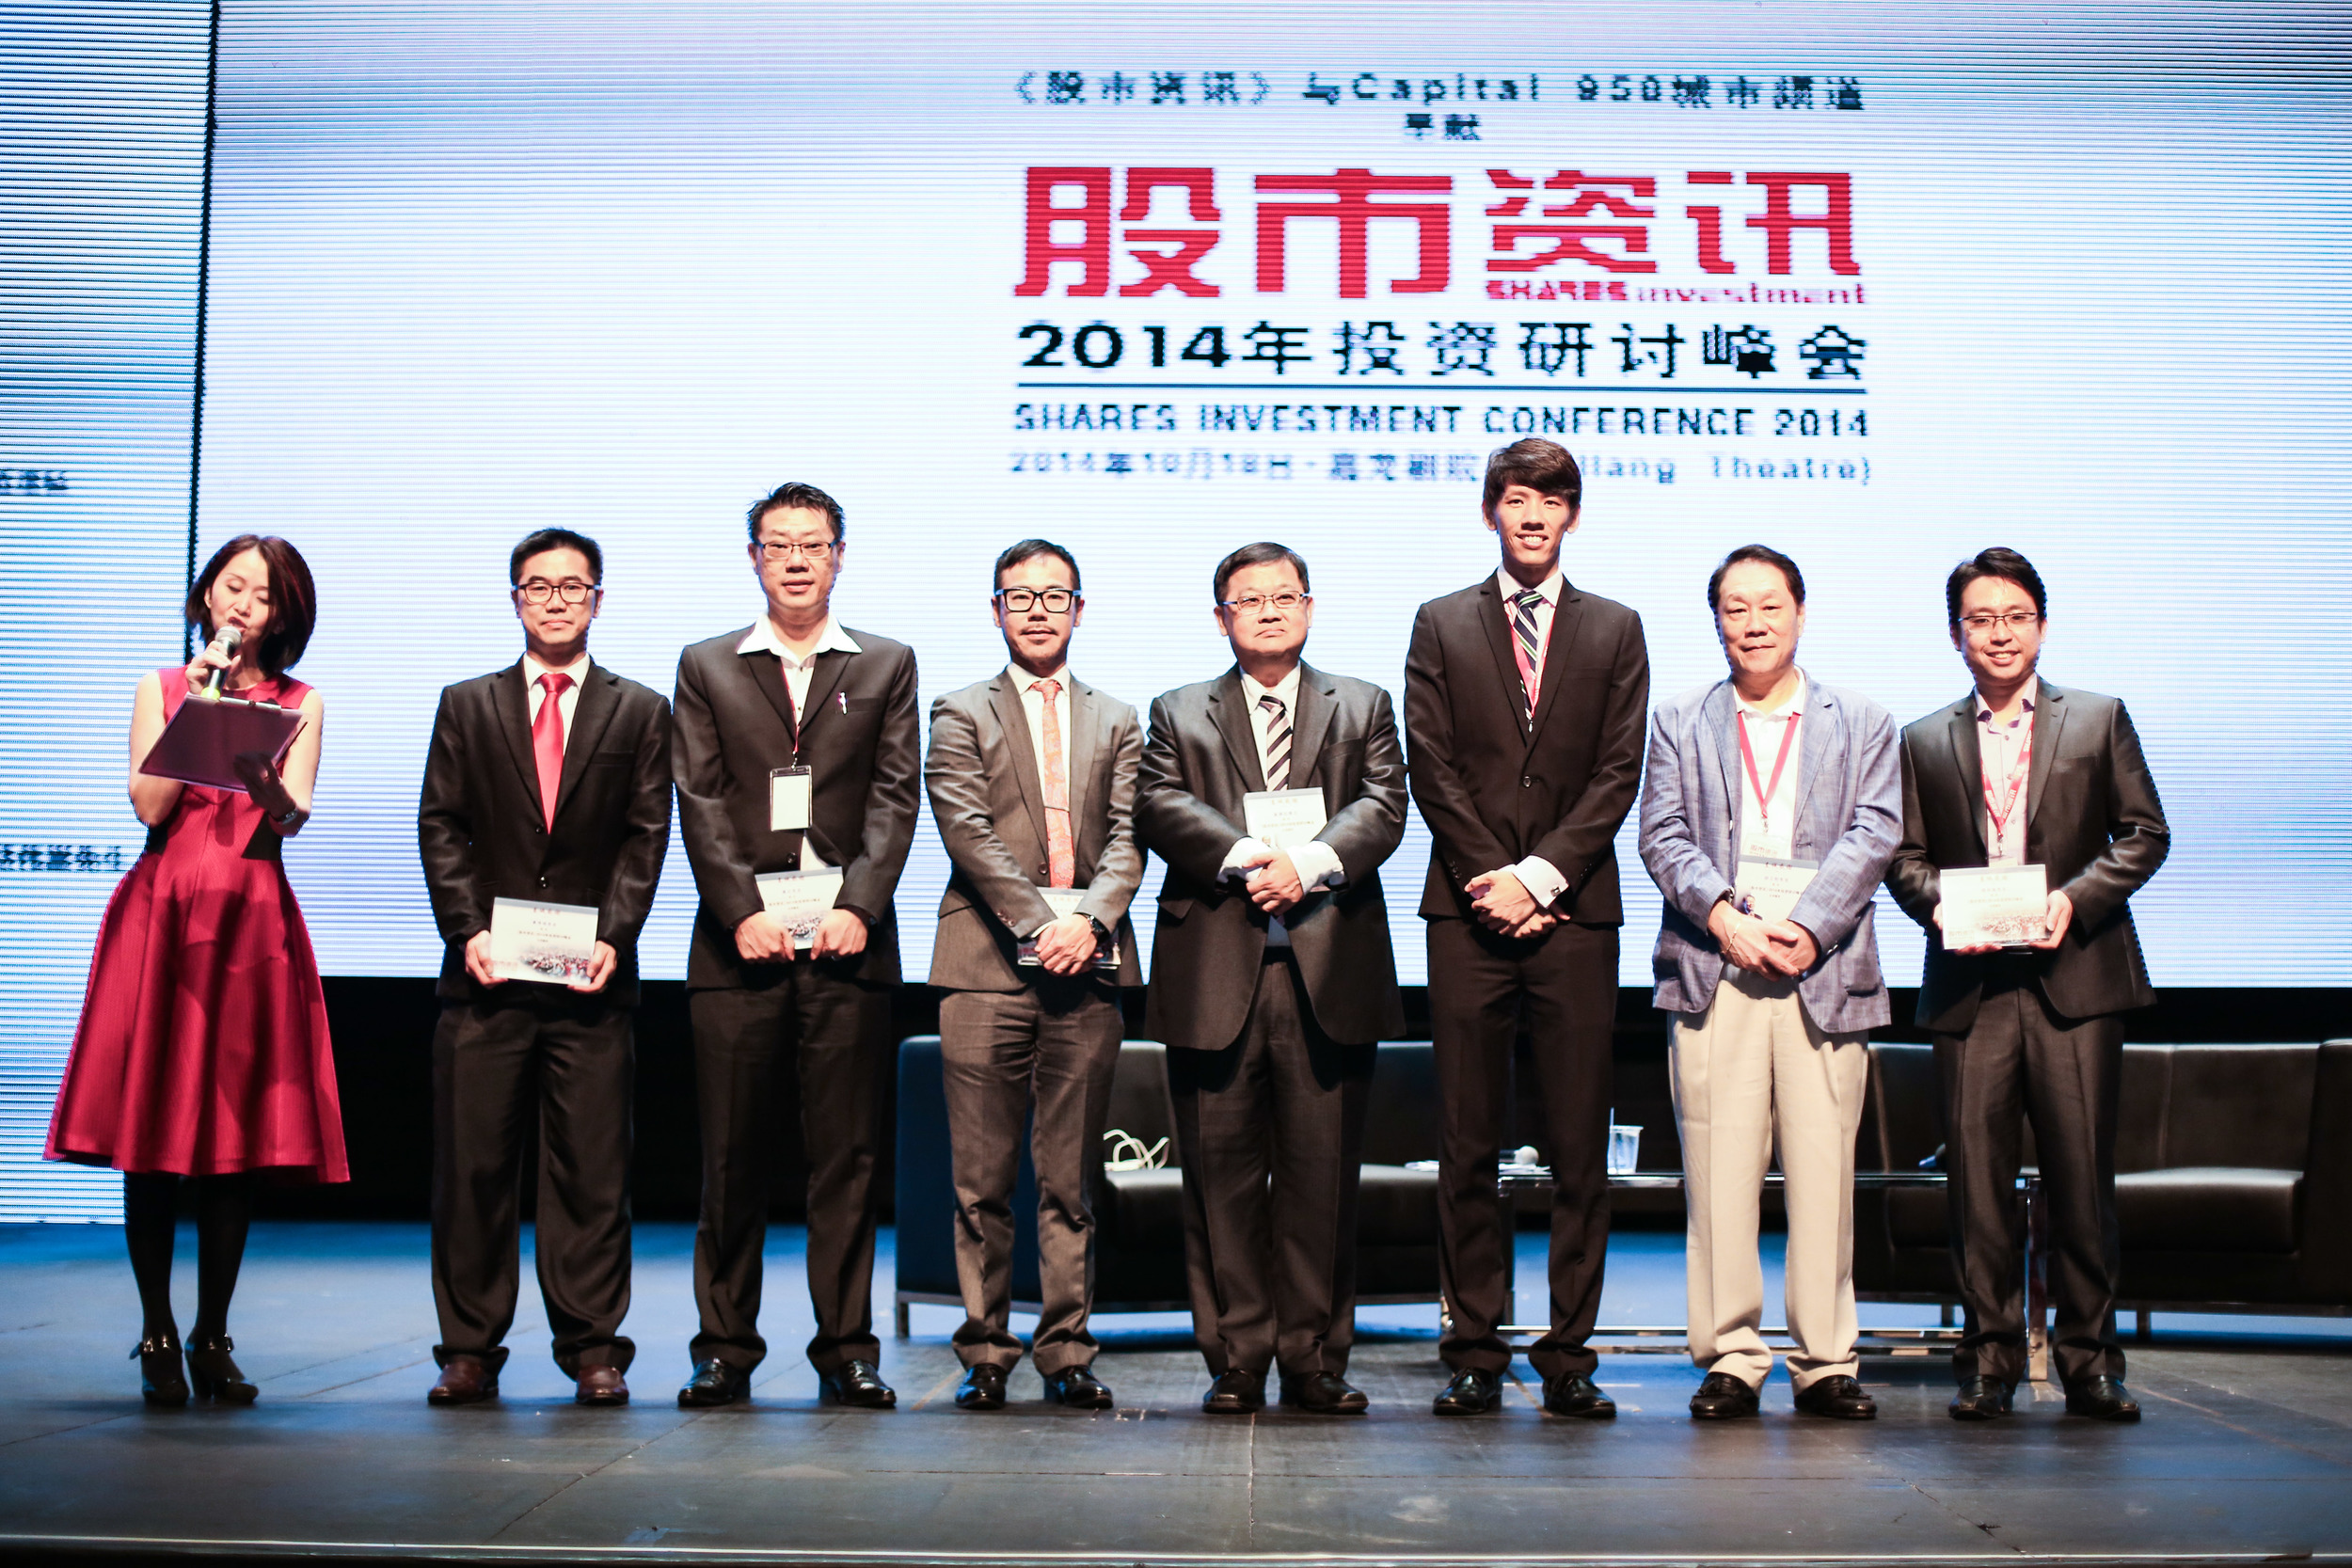 Thought Leaders At Shares Investment Conference 2014